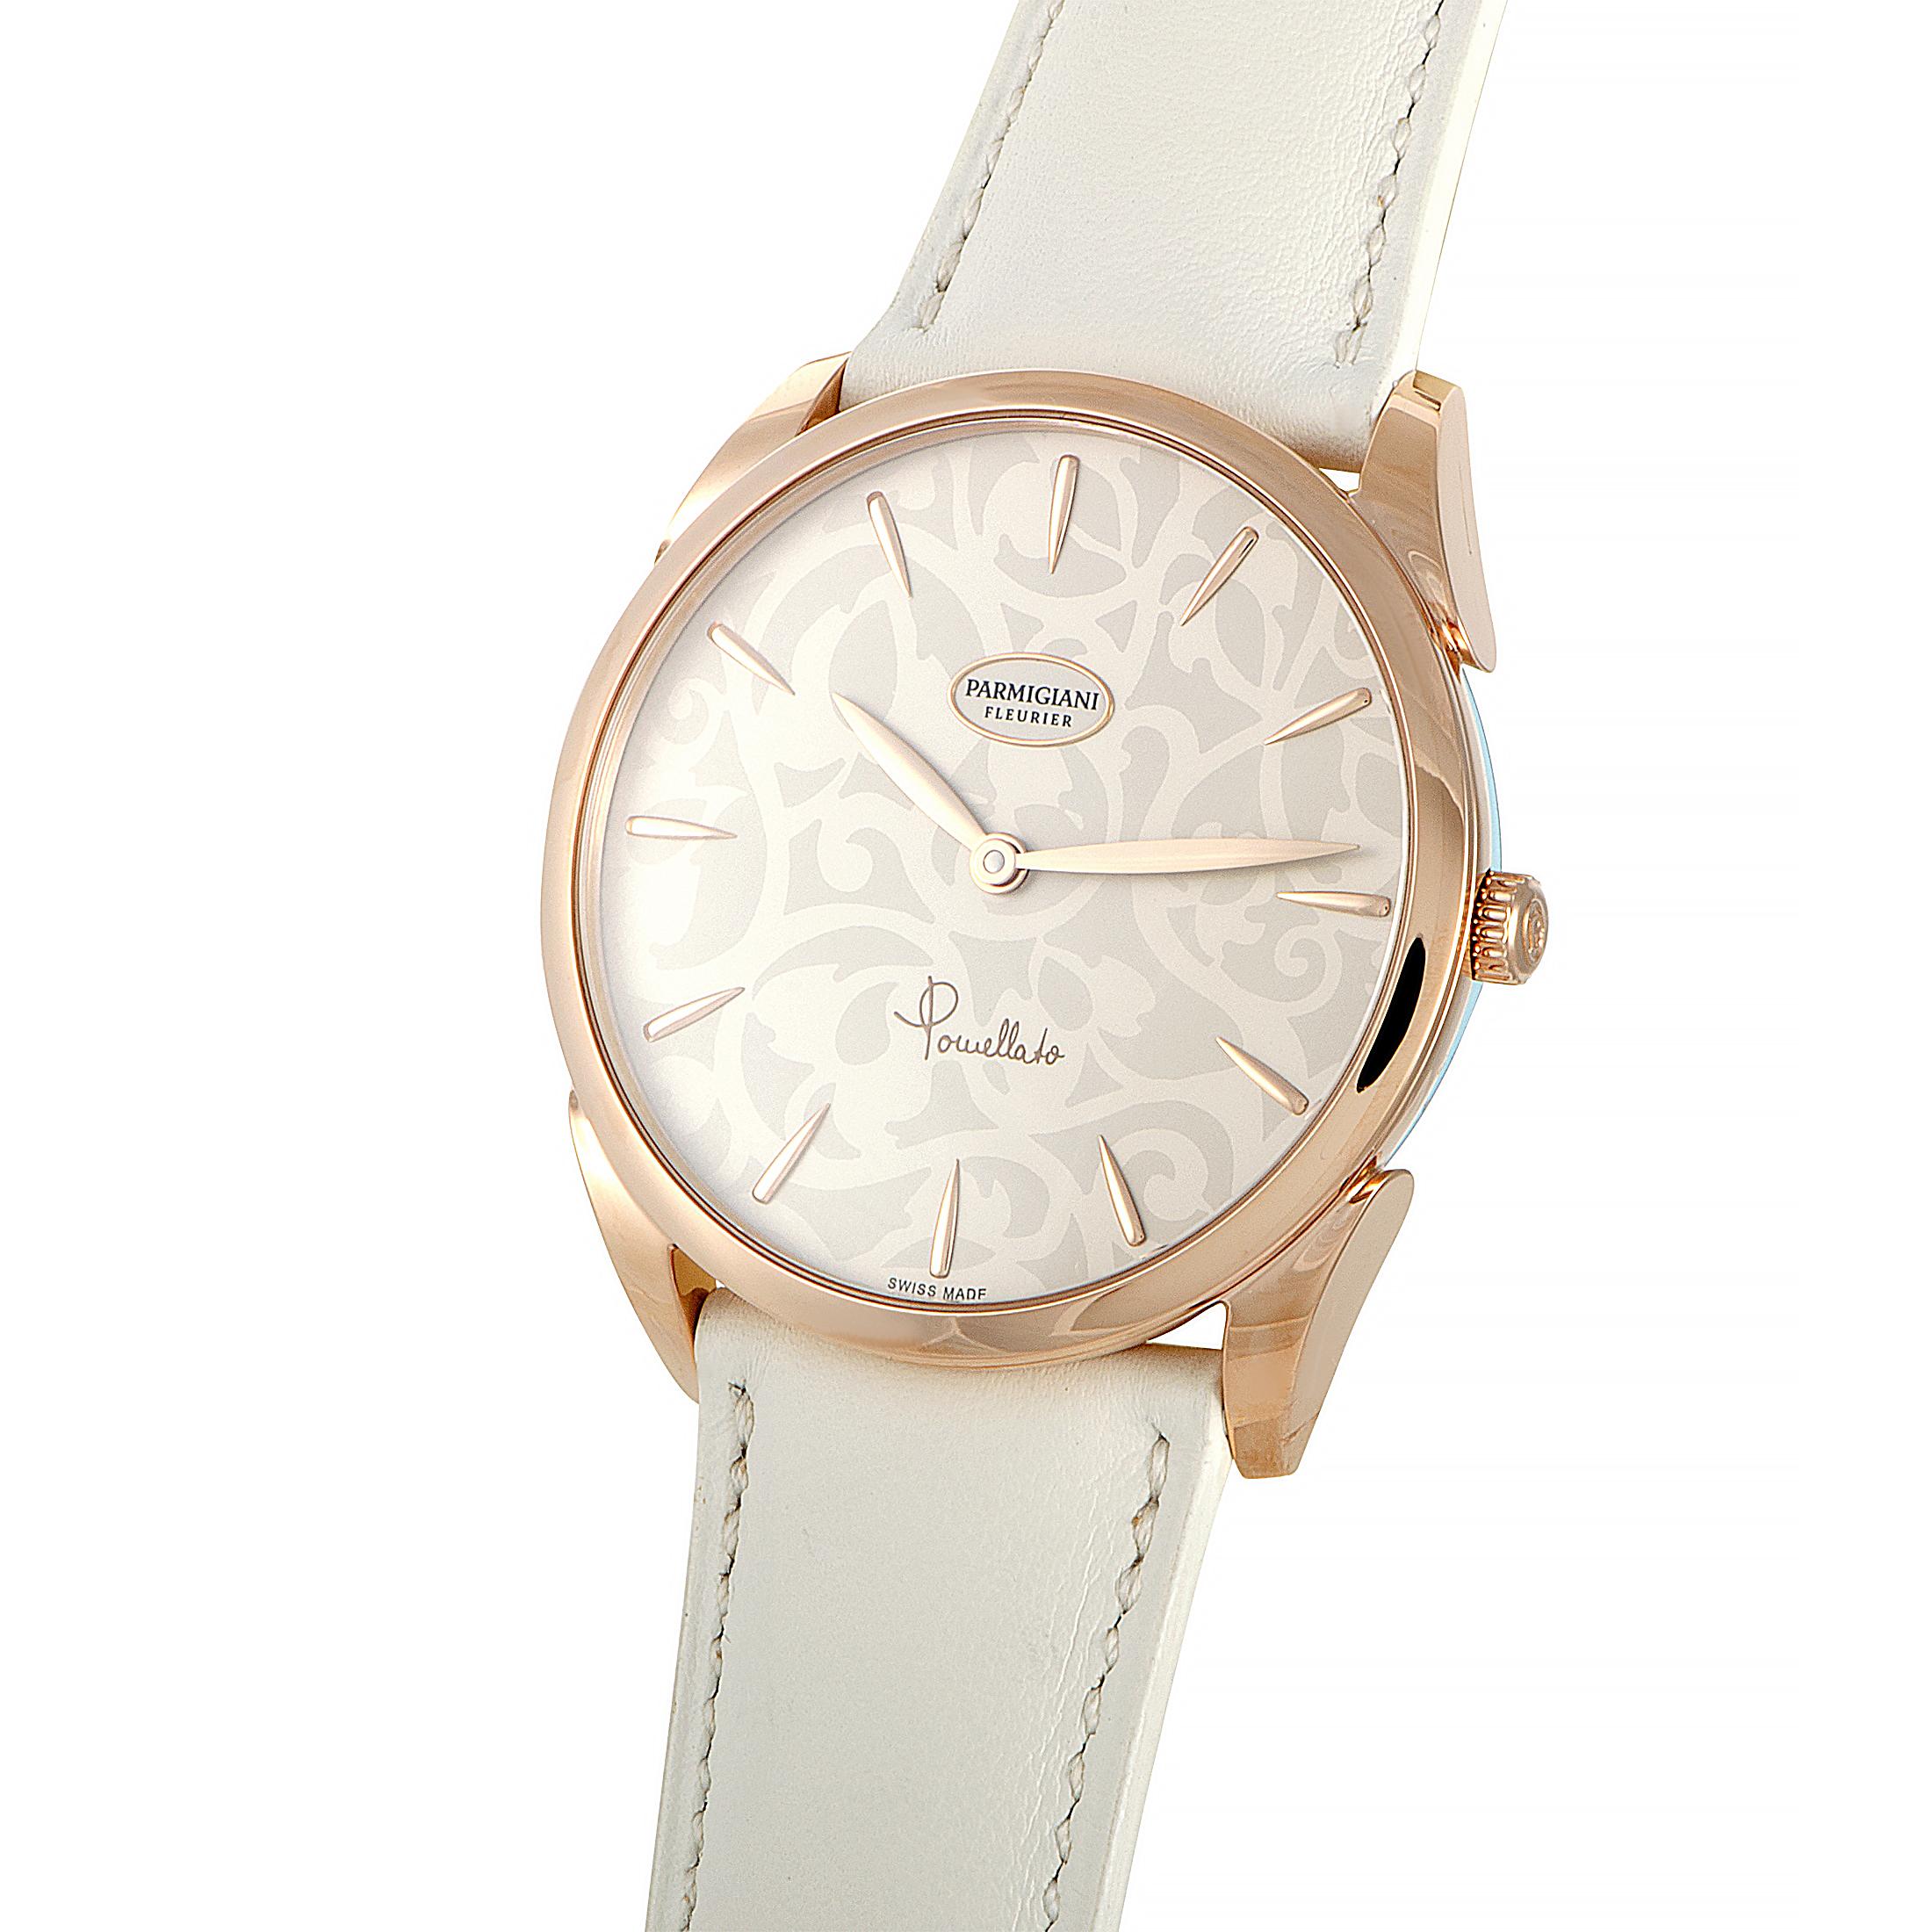 Exceptionally subtle, intricately designed, and exquisitely applied, the intriguing pattern of the dial is inspired by the esteemed “Arabesque” collection of Pomellato in this gorgeously feminine timepiece from Parmigiani Fleurier. The watch is